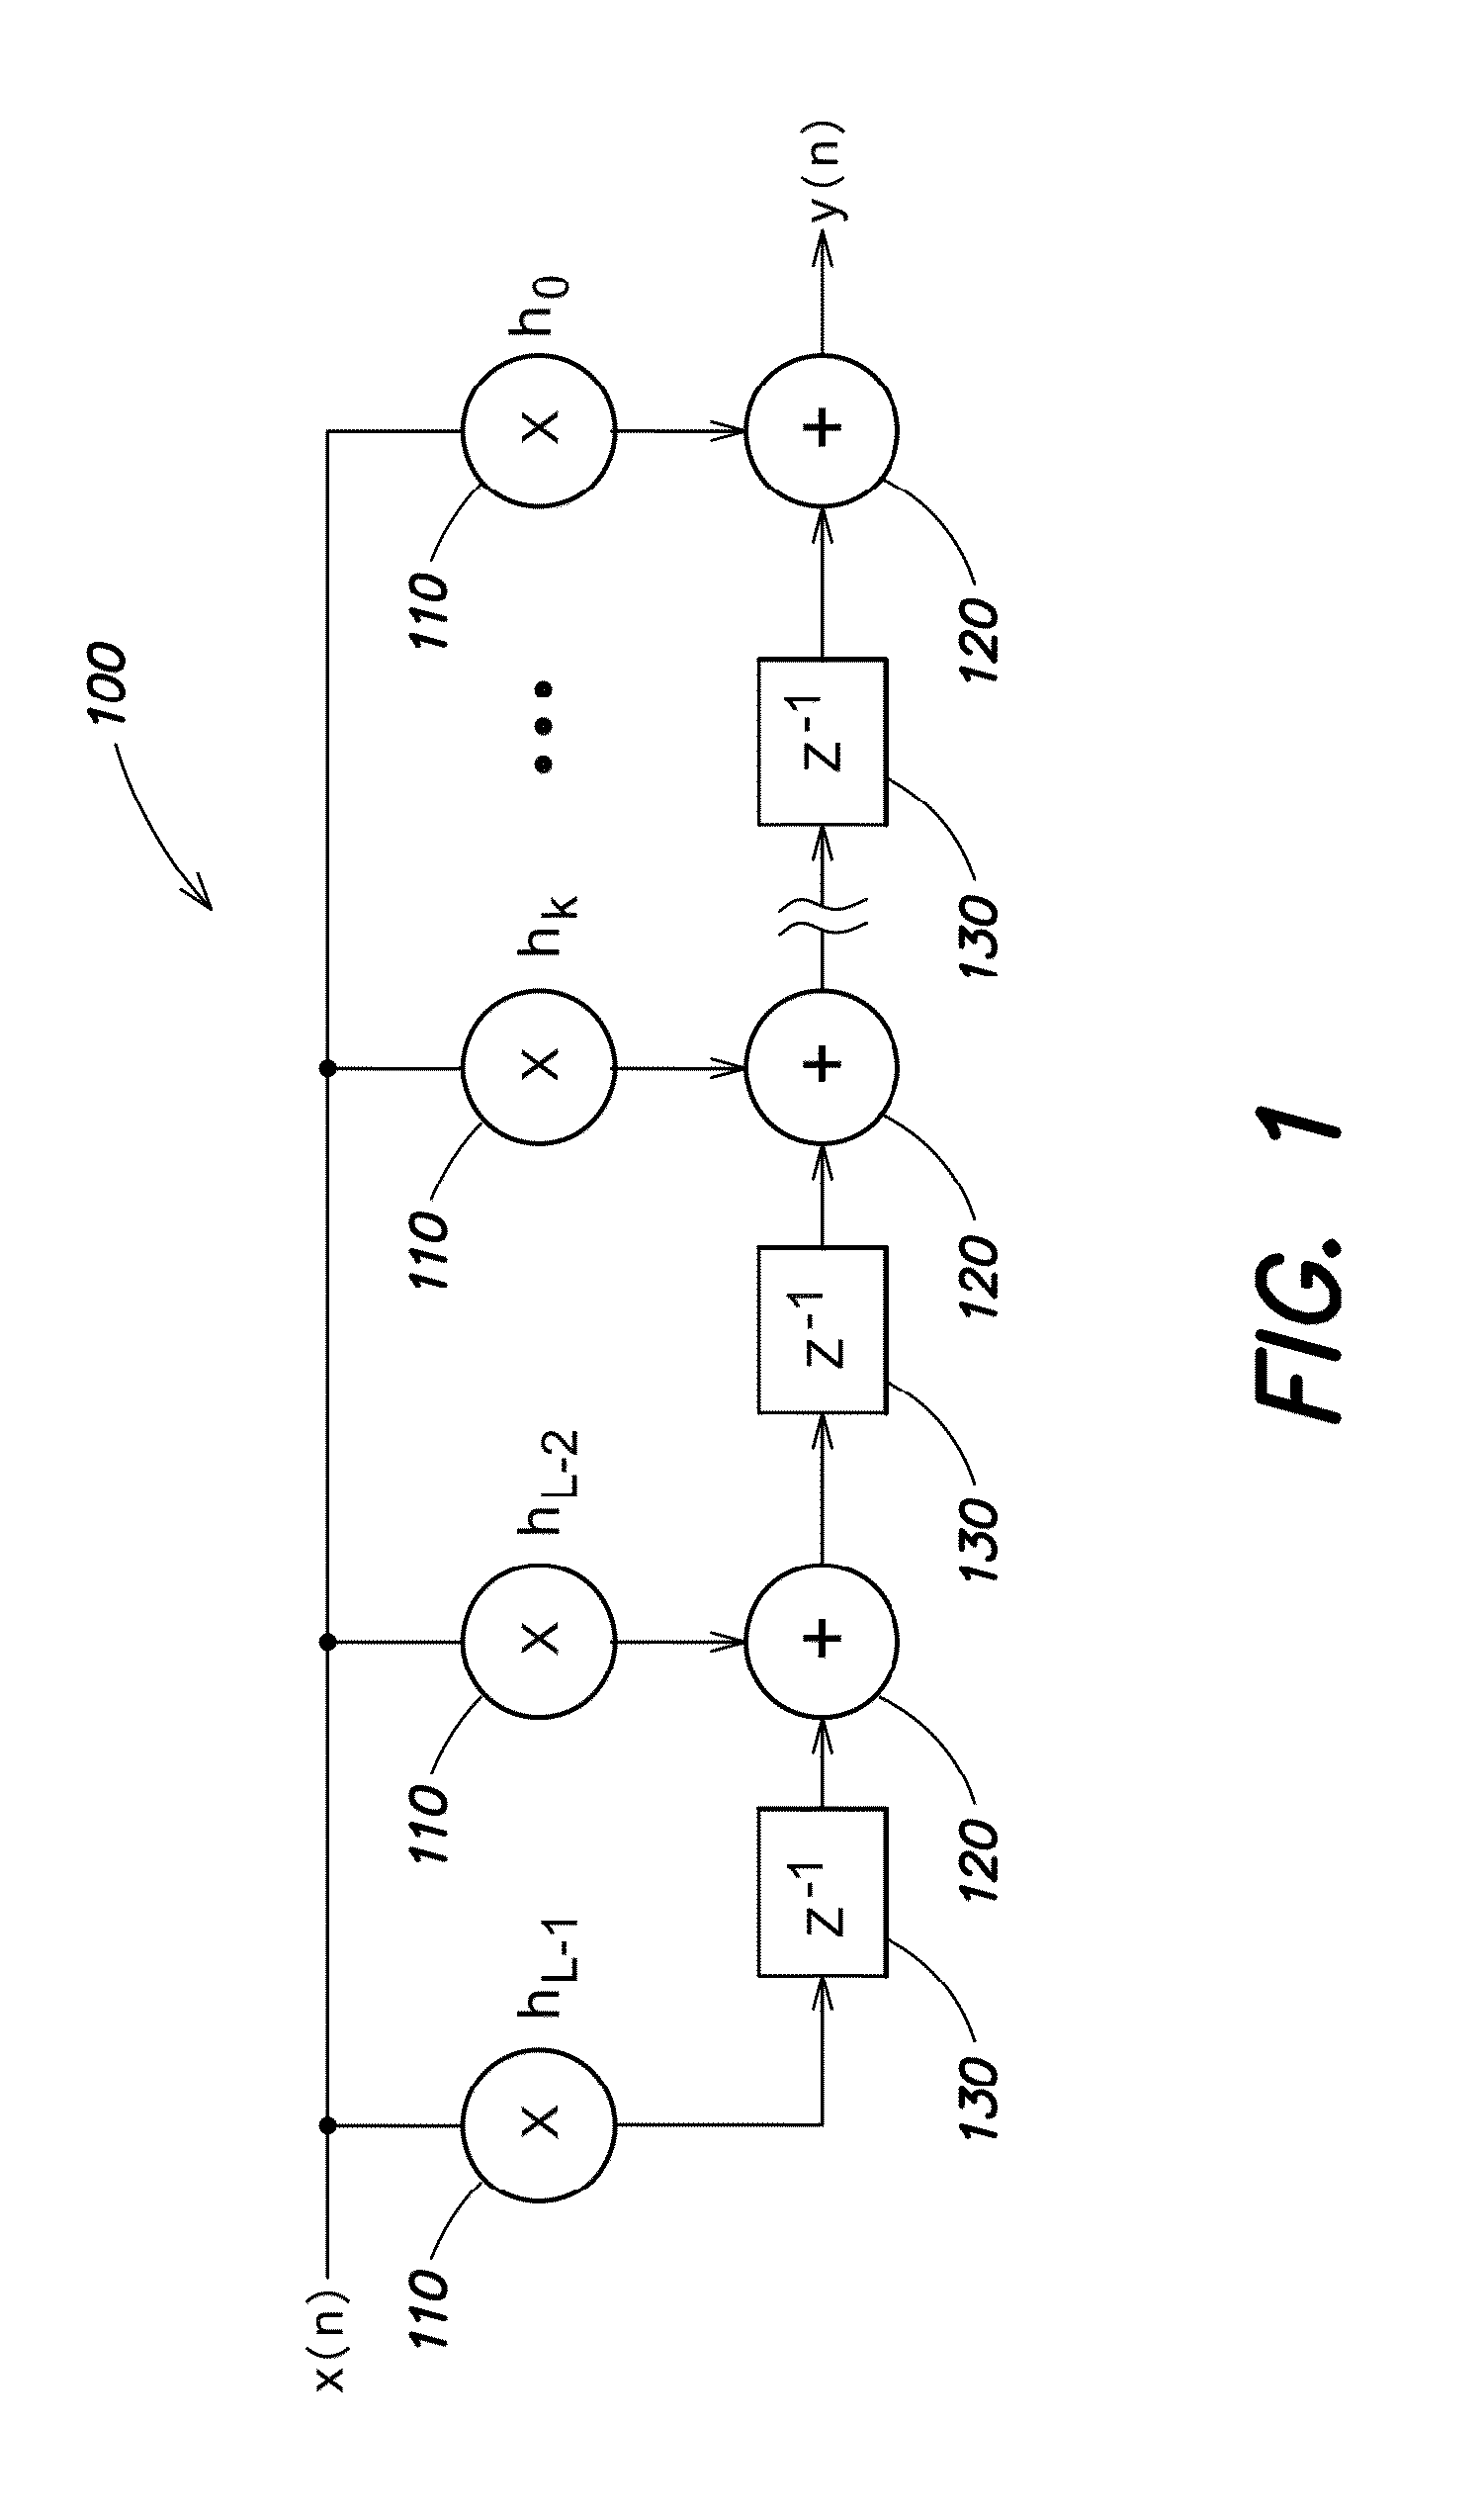 Polyphase decimation fir filters and methods